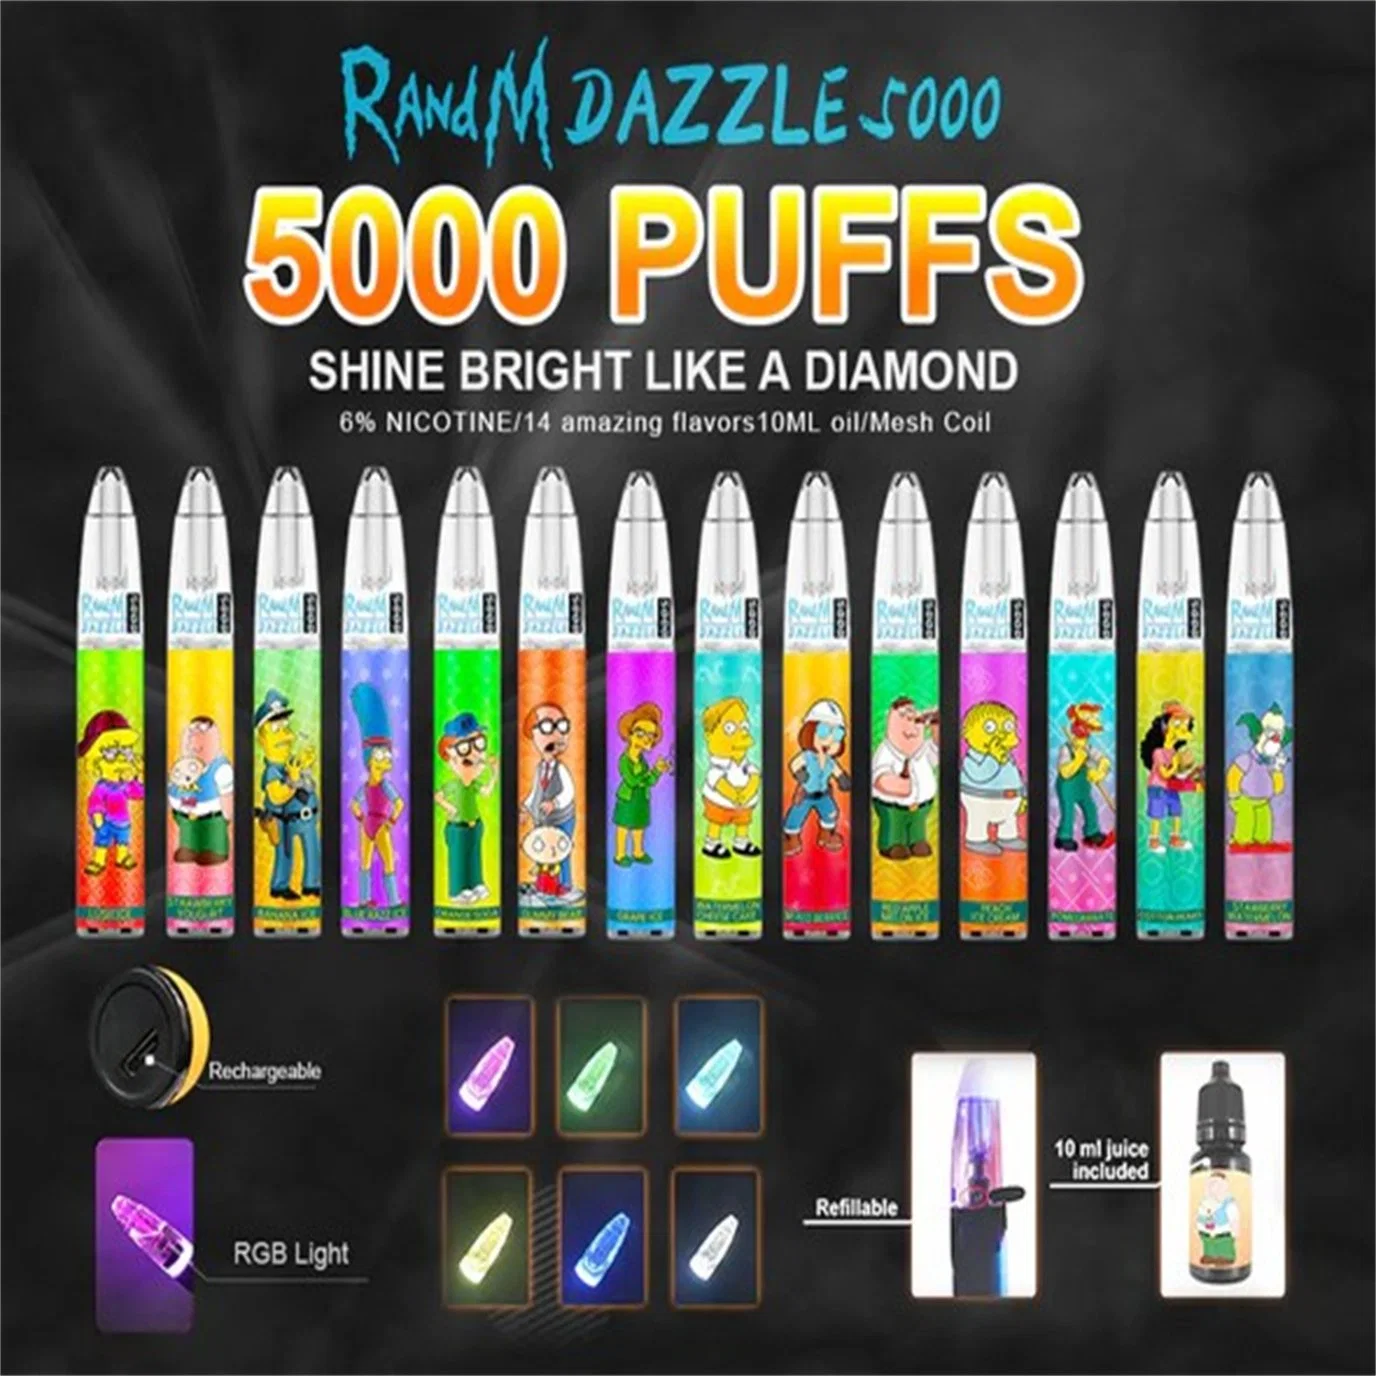 2022 New Randm Dazzle 5000 Puffs Disposable/Chargeable Pod Device Kit vape Rechargeable Battery Prefilled 10ml Cartridge Vape Pen Authentic Vs Air Max Puff Bars